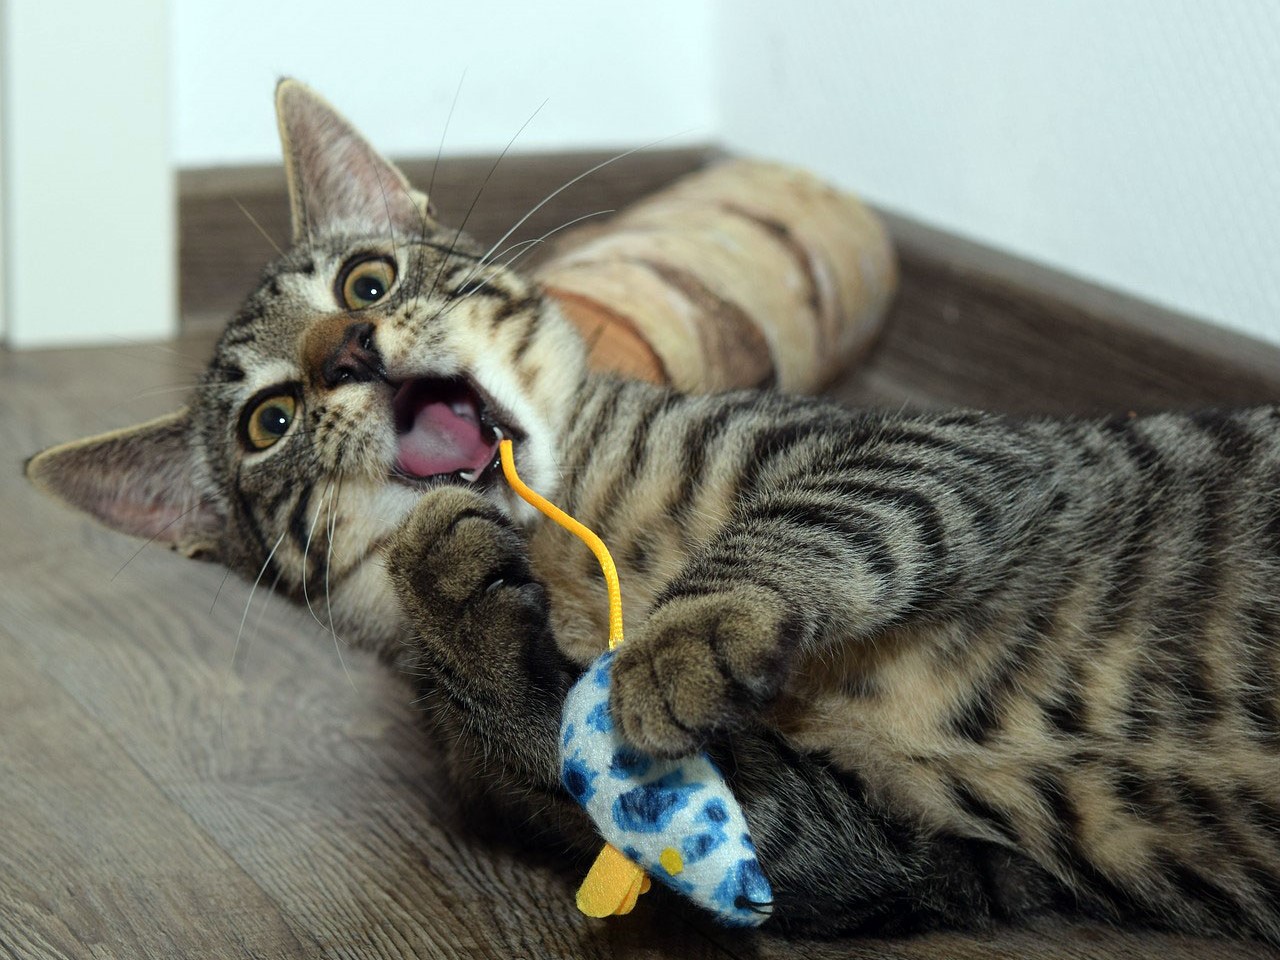 Cat playing with a stuffed mouse and biting it, ready to make the "kill"